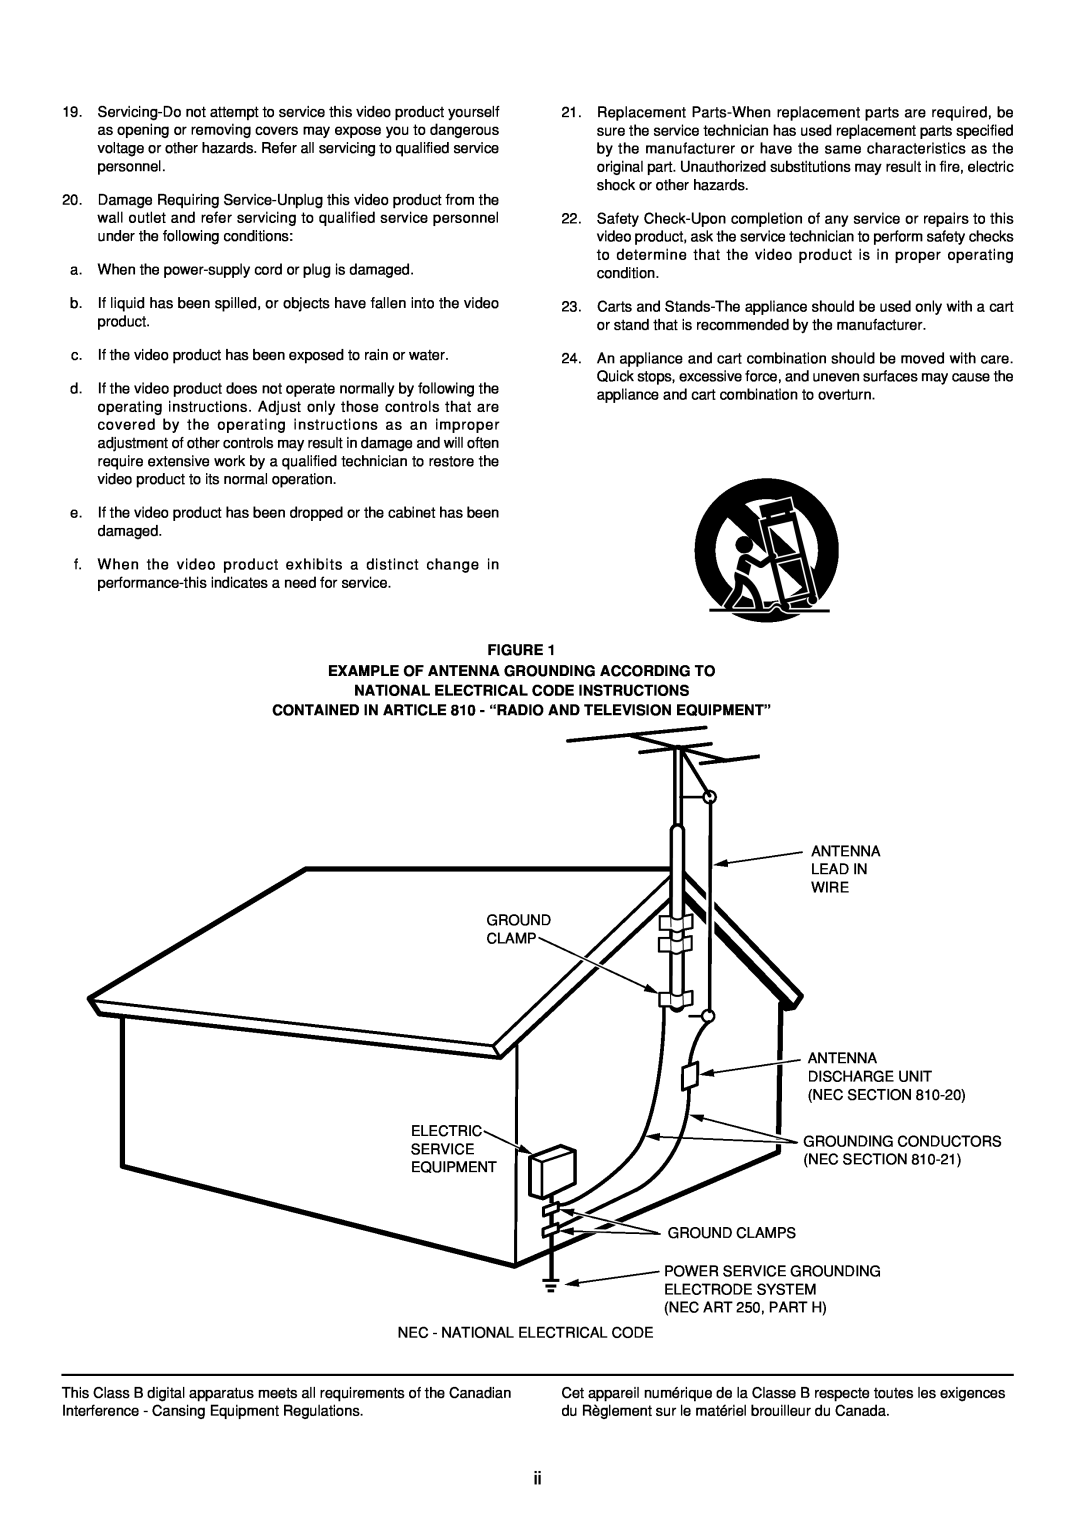 Marantz SR5200 manual Figure Example Of Antenna Grounding According To, National Electrical Code Instructions 